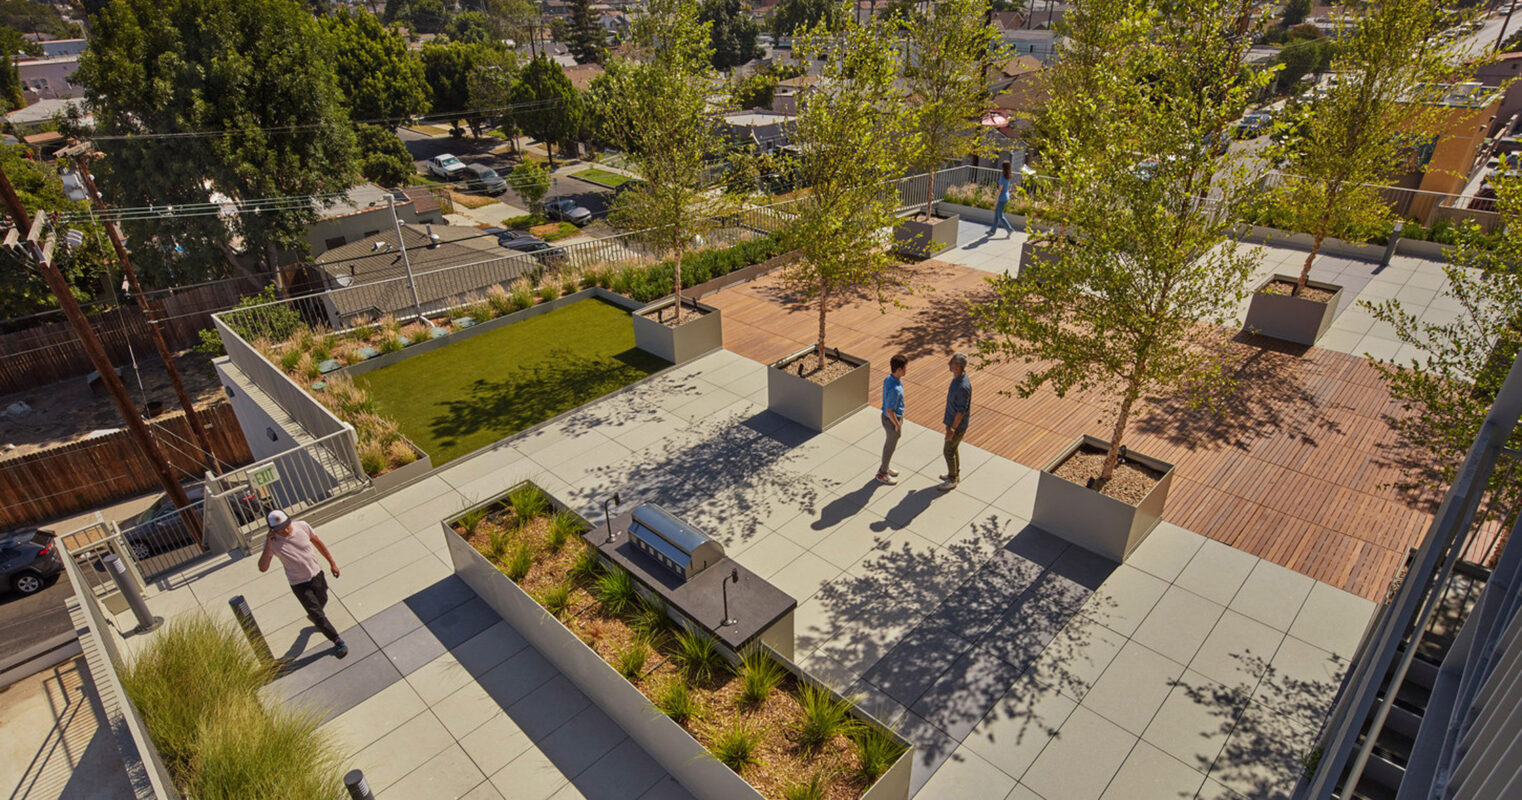 Rooftop terrace features modular seating and lush plantings, optimizing urban space with a green area and walkways, amidst a backdrop of cityscape and palm trees.